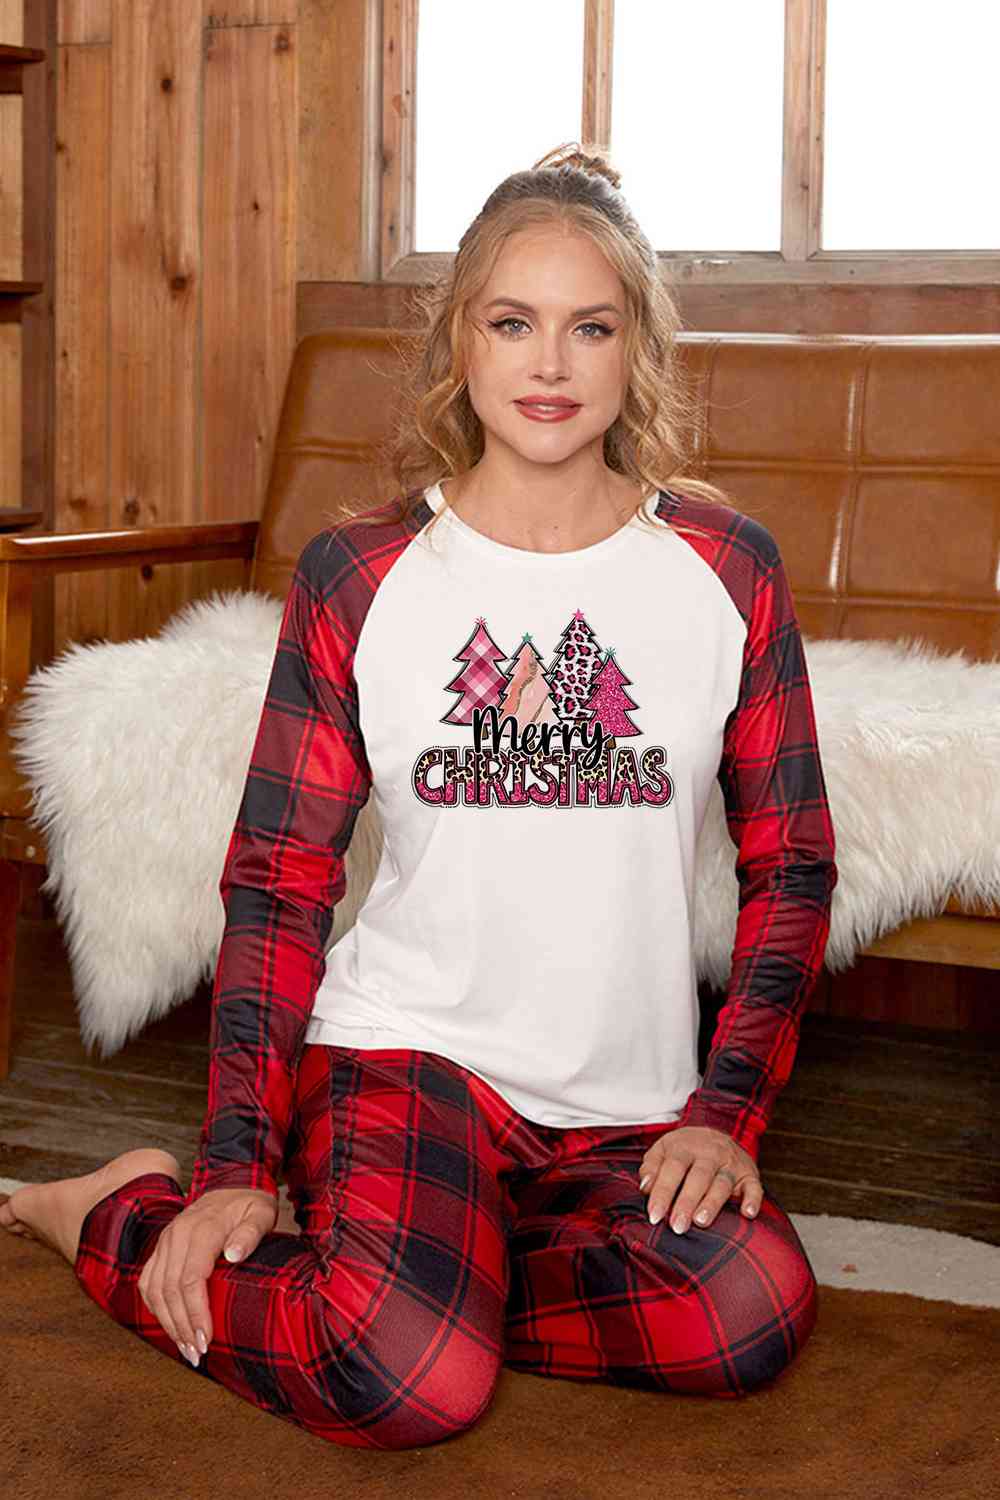 MERRY CHRISTMAS Graphic Top and Plaid Pants Set - Kawaii Stop - Christmas, Christmas Set, Comfortable Fit, Festive Fashion, Graphic Top, Holiday Cheer, Holiday Ensemble, Holiday Outfit, Plaid Pants, S.D.E, Seasonal Style, Ship From Overseas, Winter Wardrobe